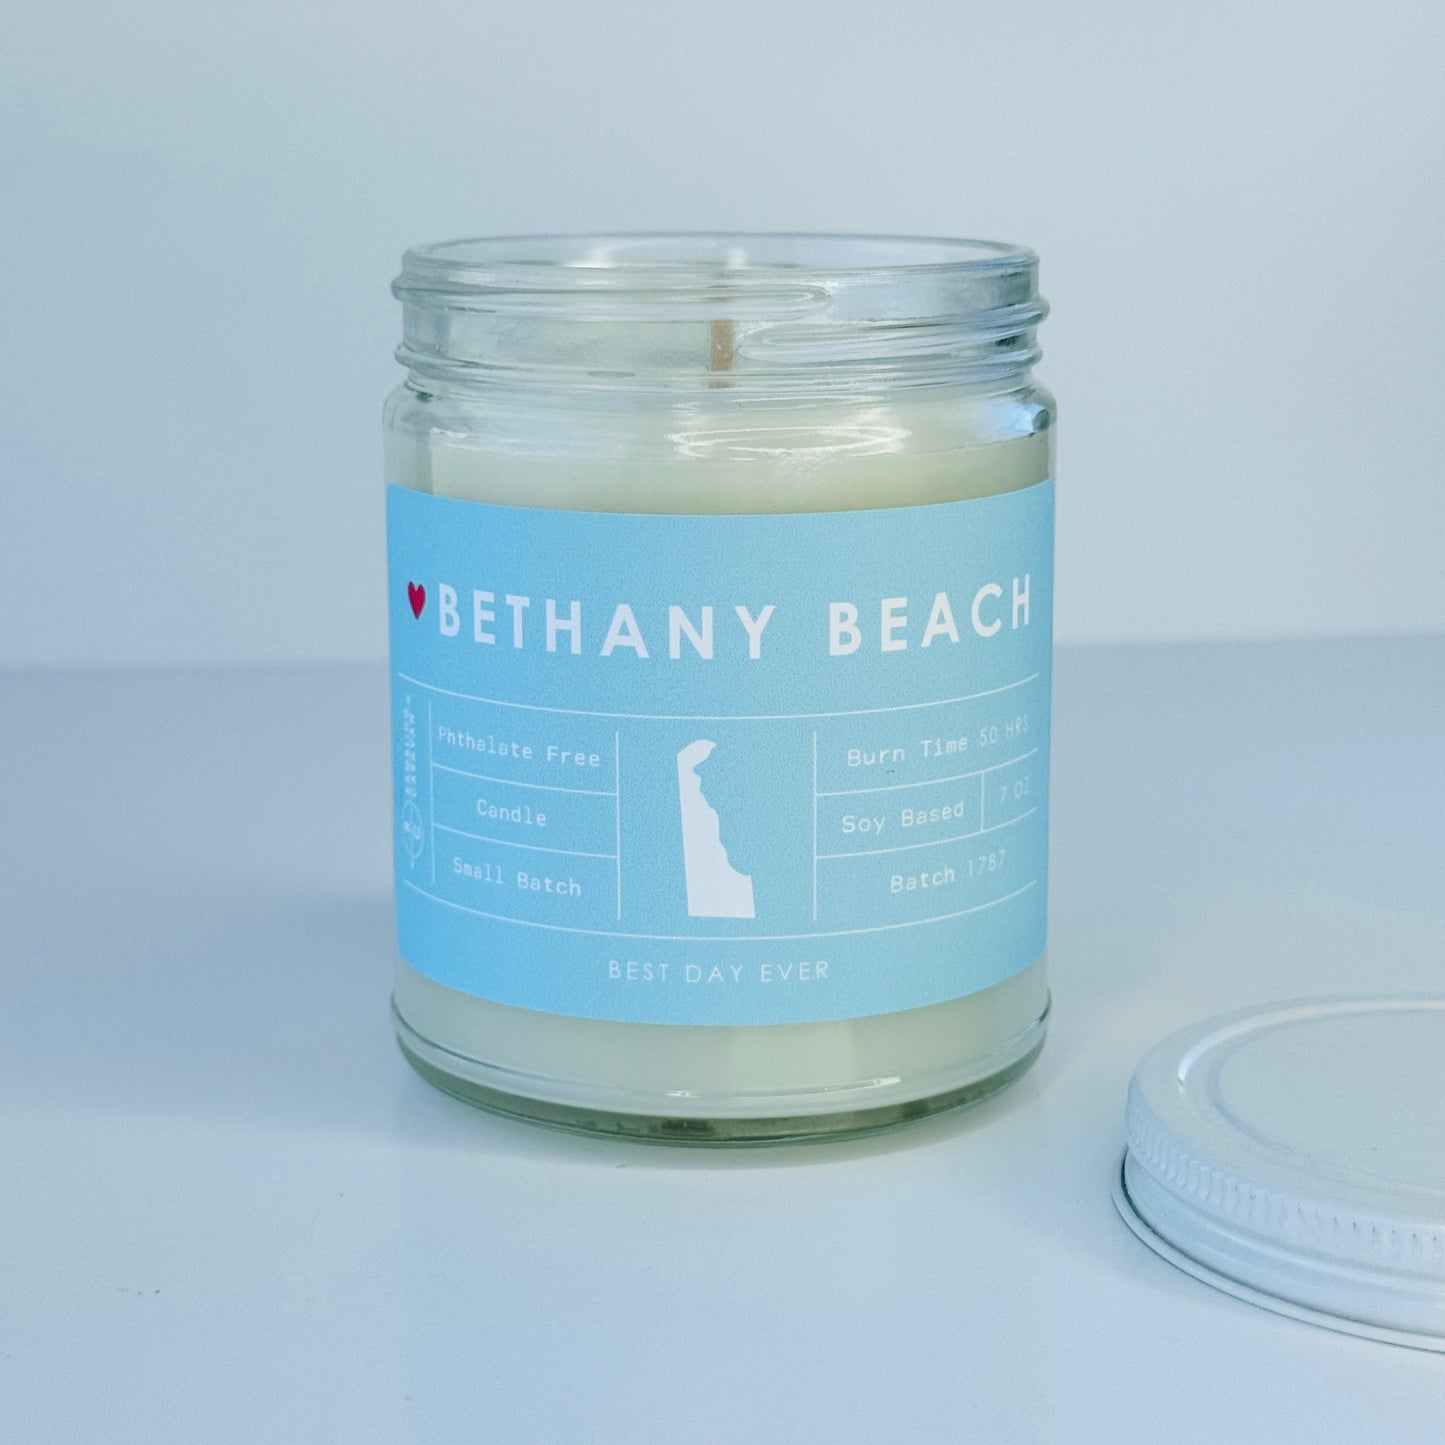 Bethany Beach Candle